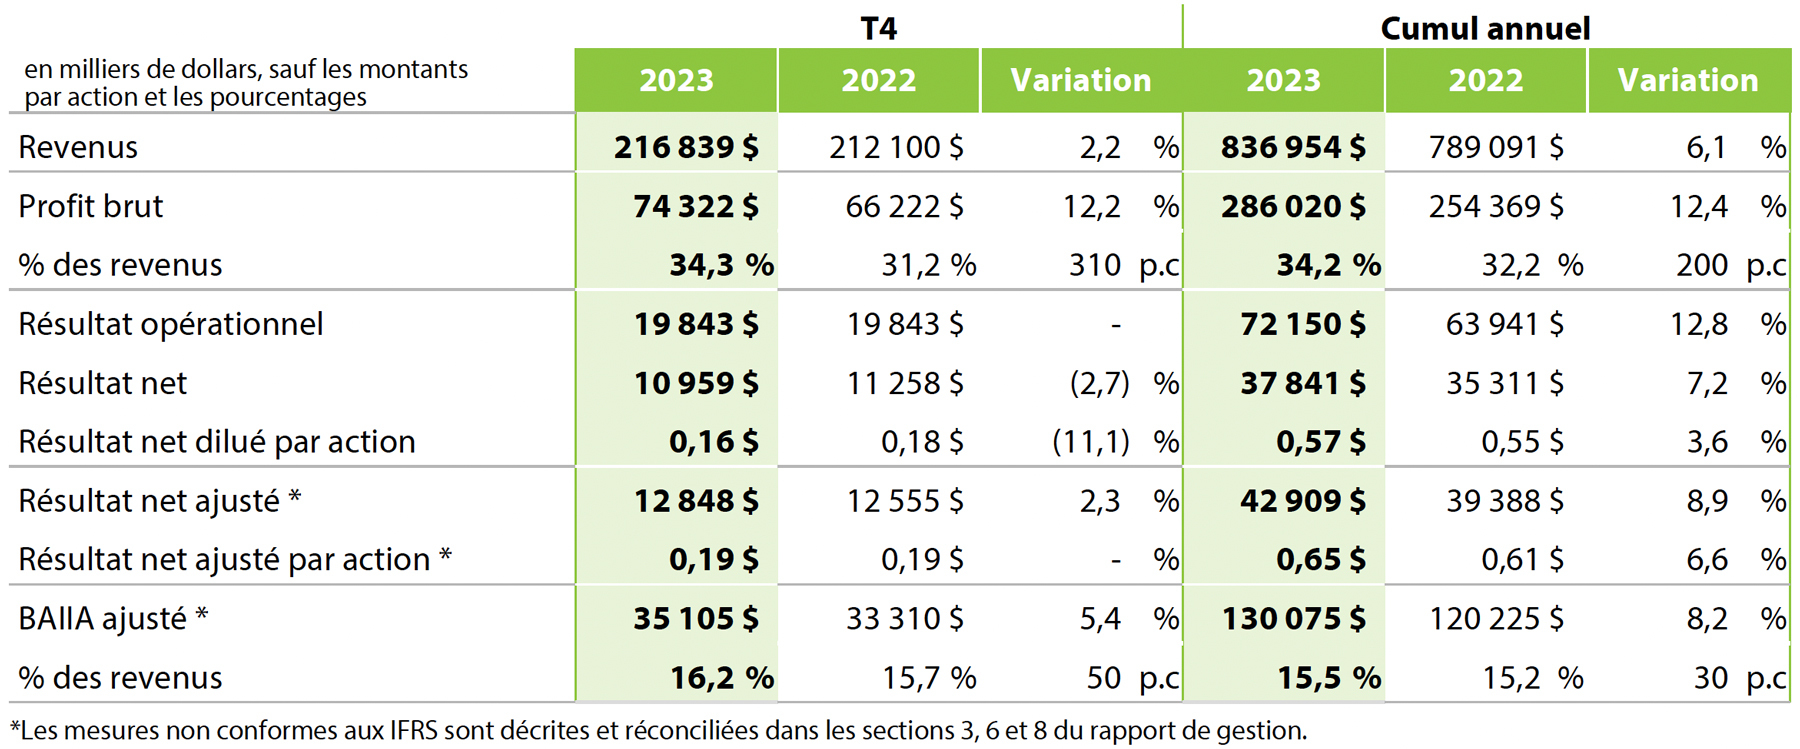 Q4 2022 Results Table 1 (French)